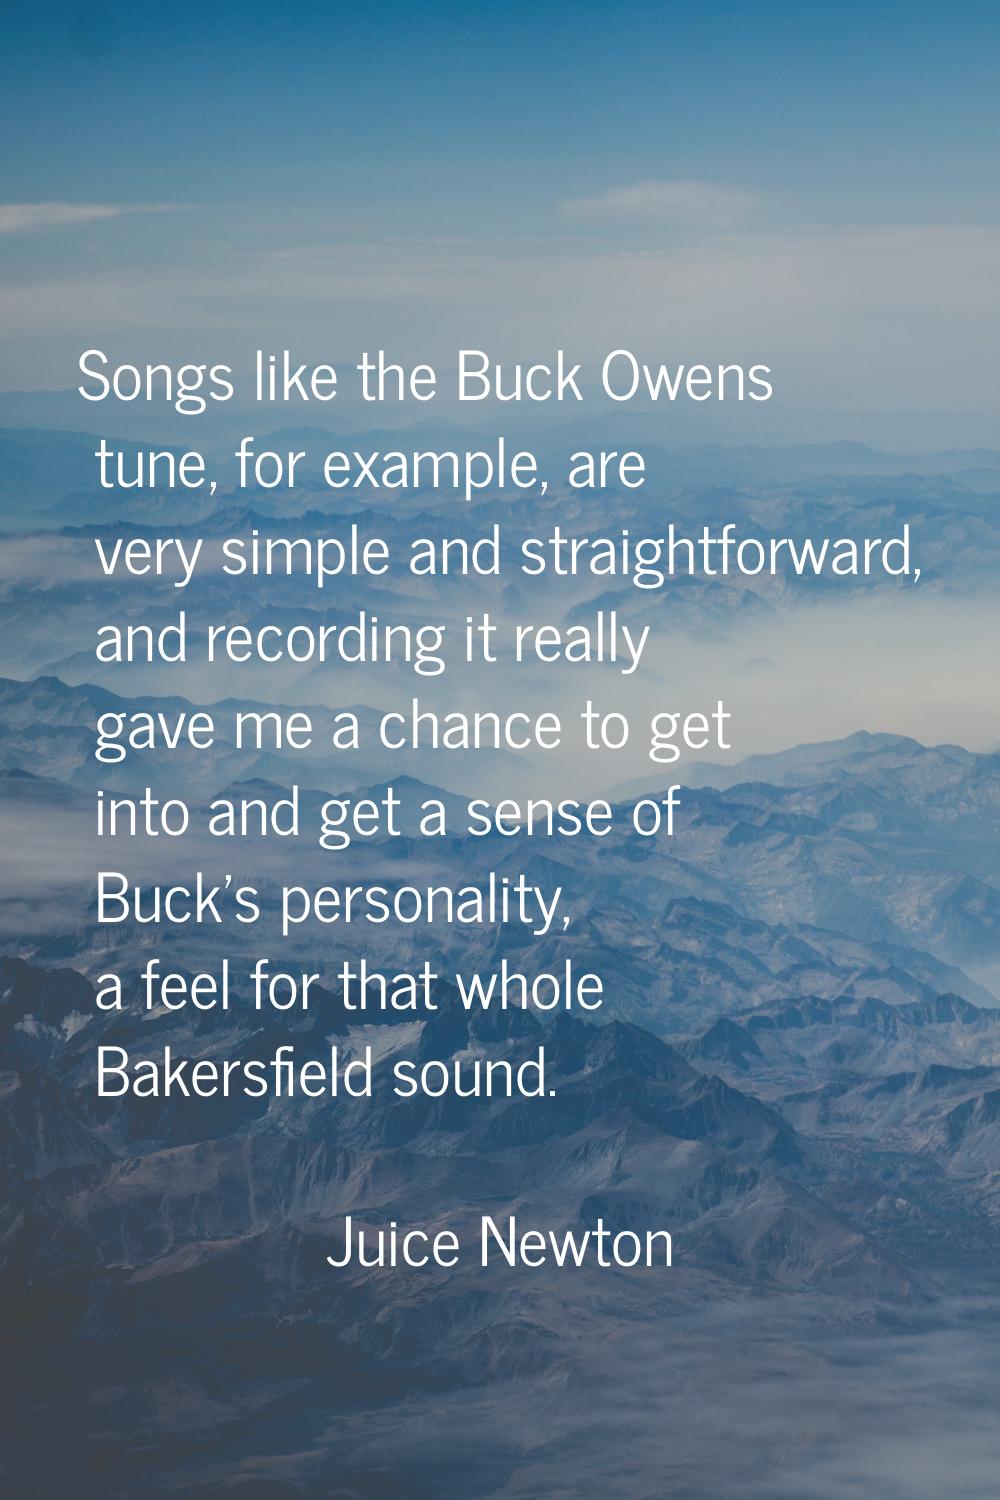 Songs like the Buck Owens tune, for example, are very simple and straightforward, and recording it 